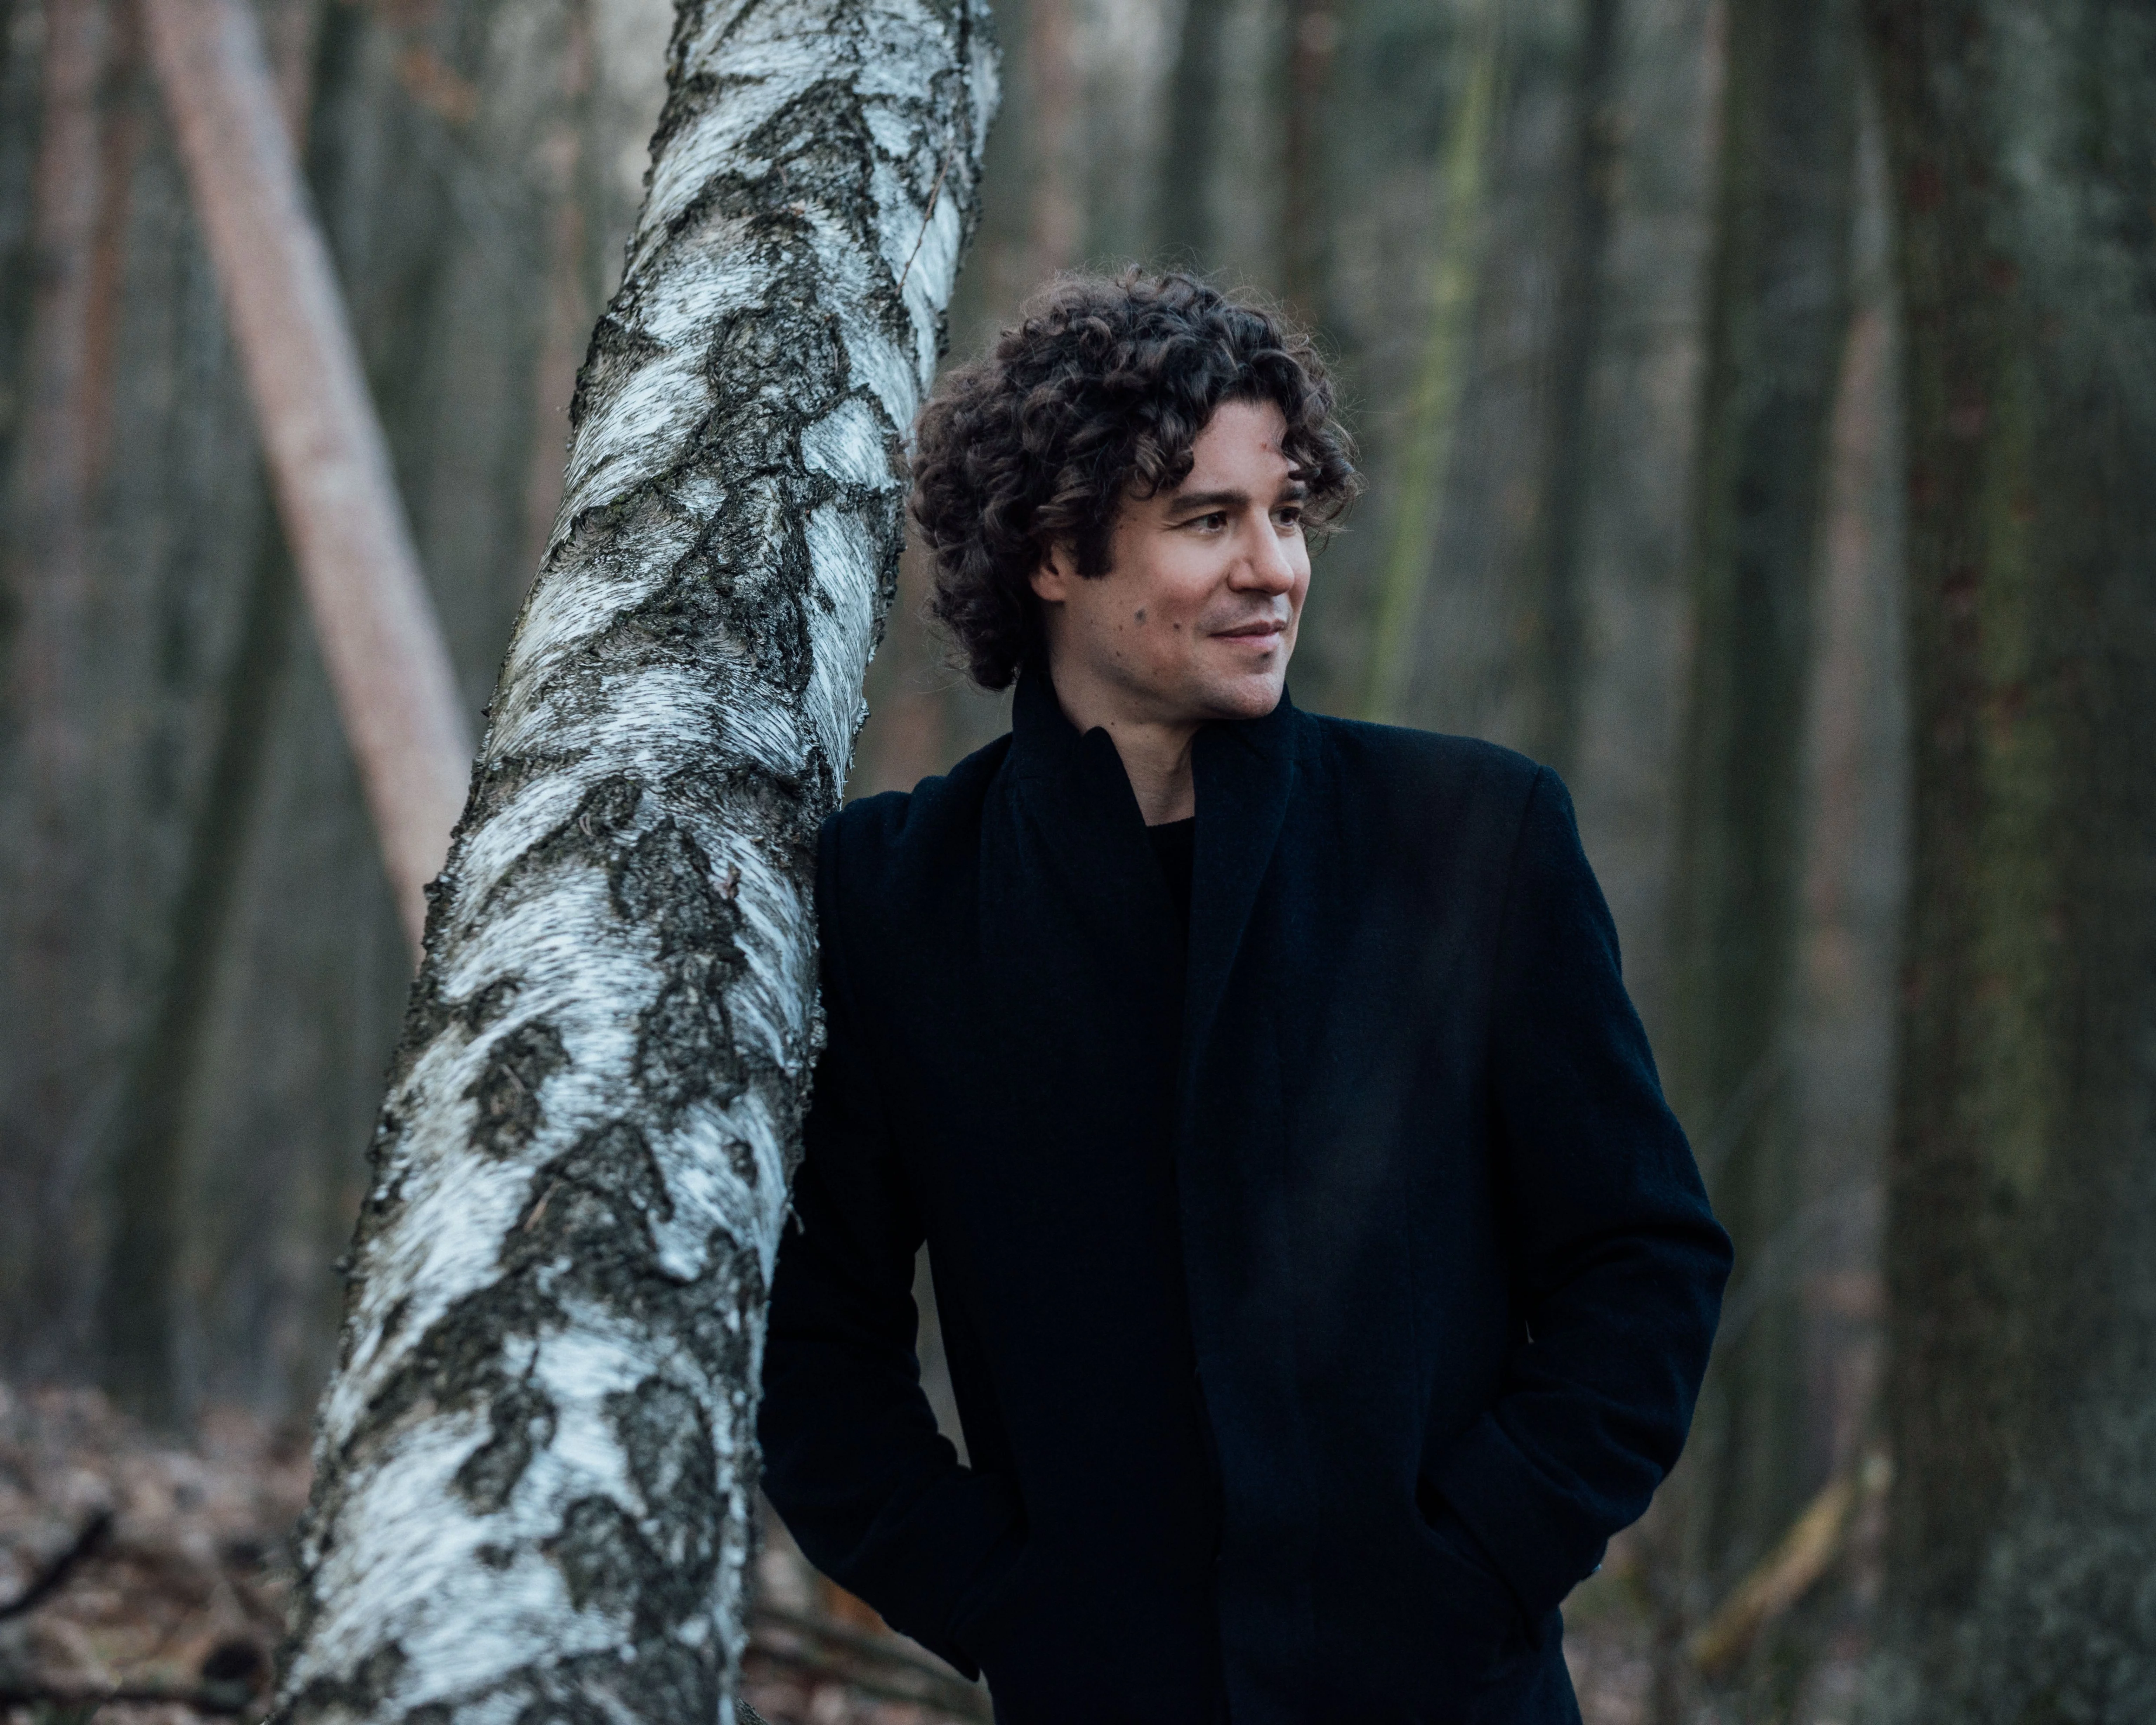 Robin Ticciati leans against a tree in the forest in his coat